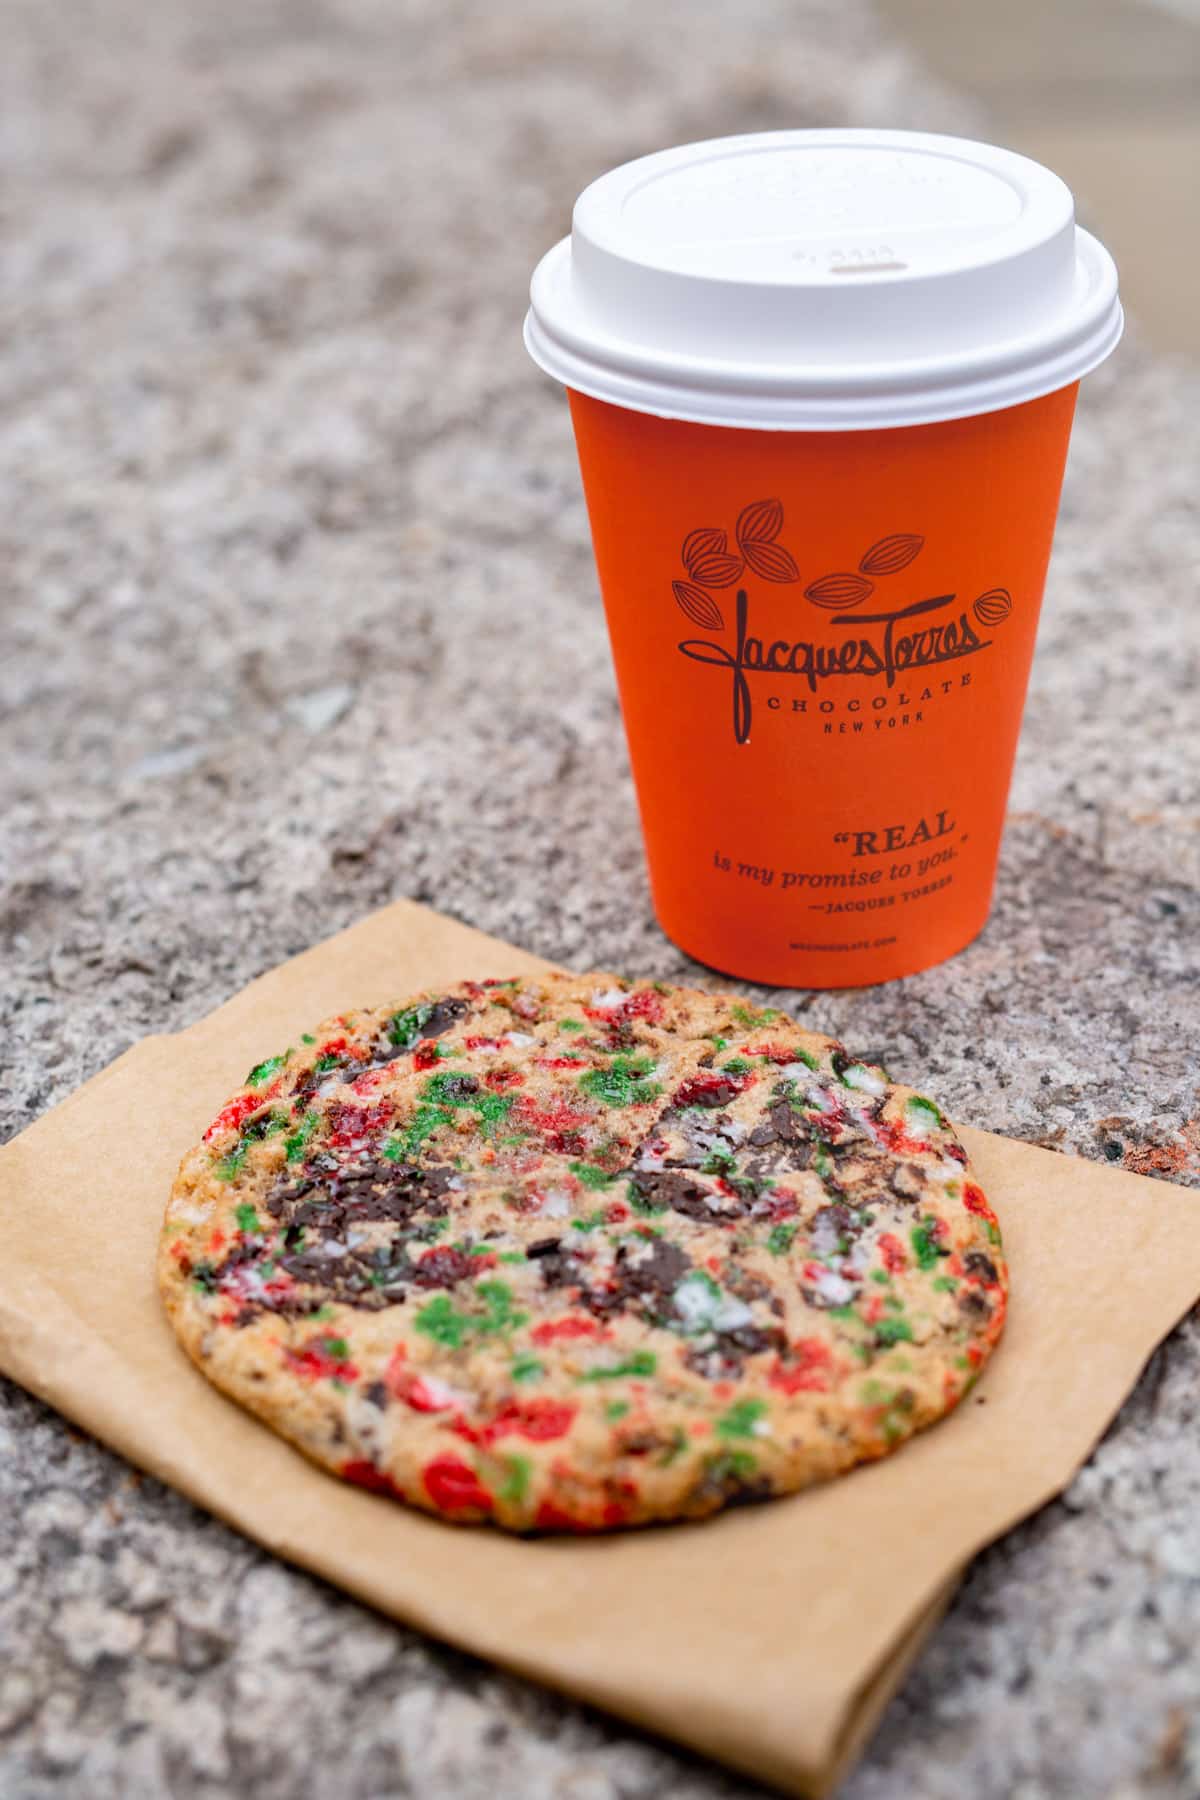 Jacques Torres Hot Chocolate and peppermint chocolate chip cookie
DUMBO Bakery